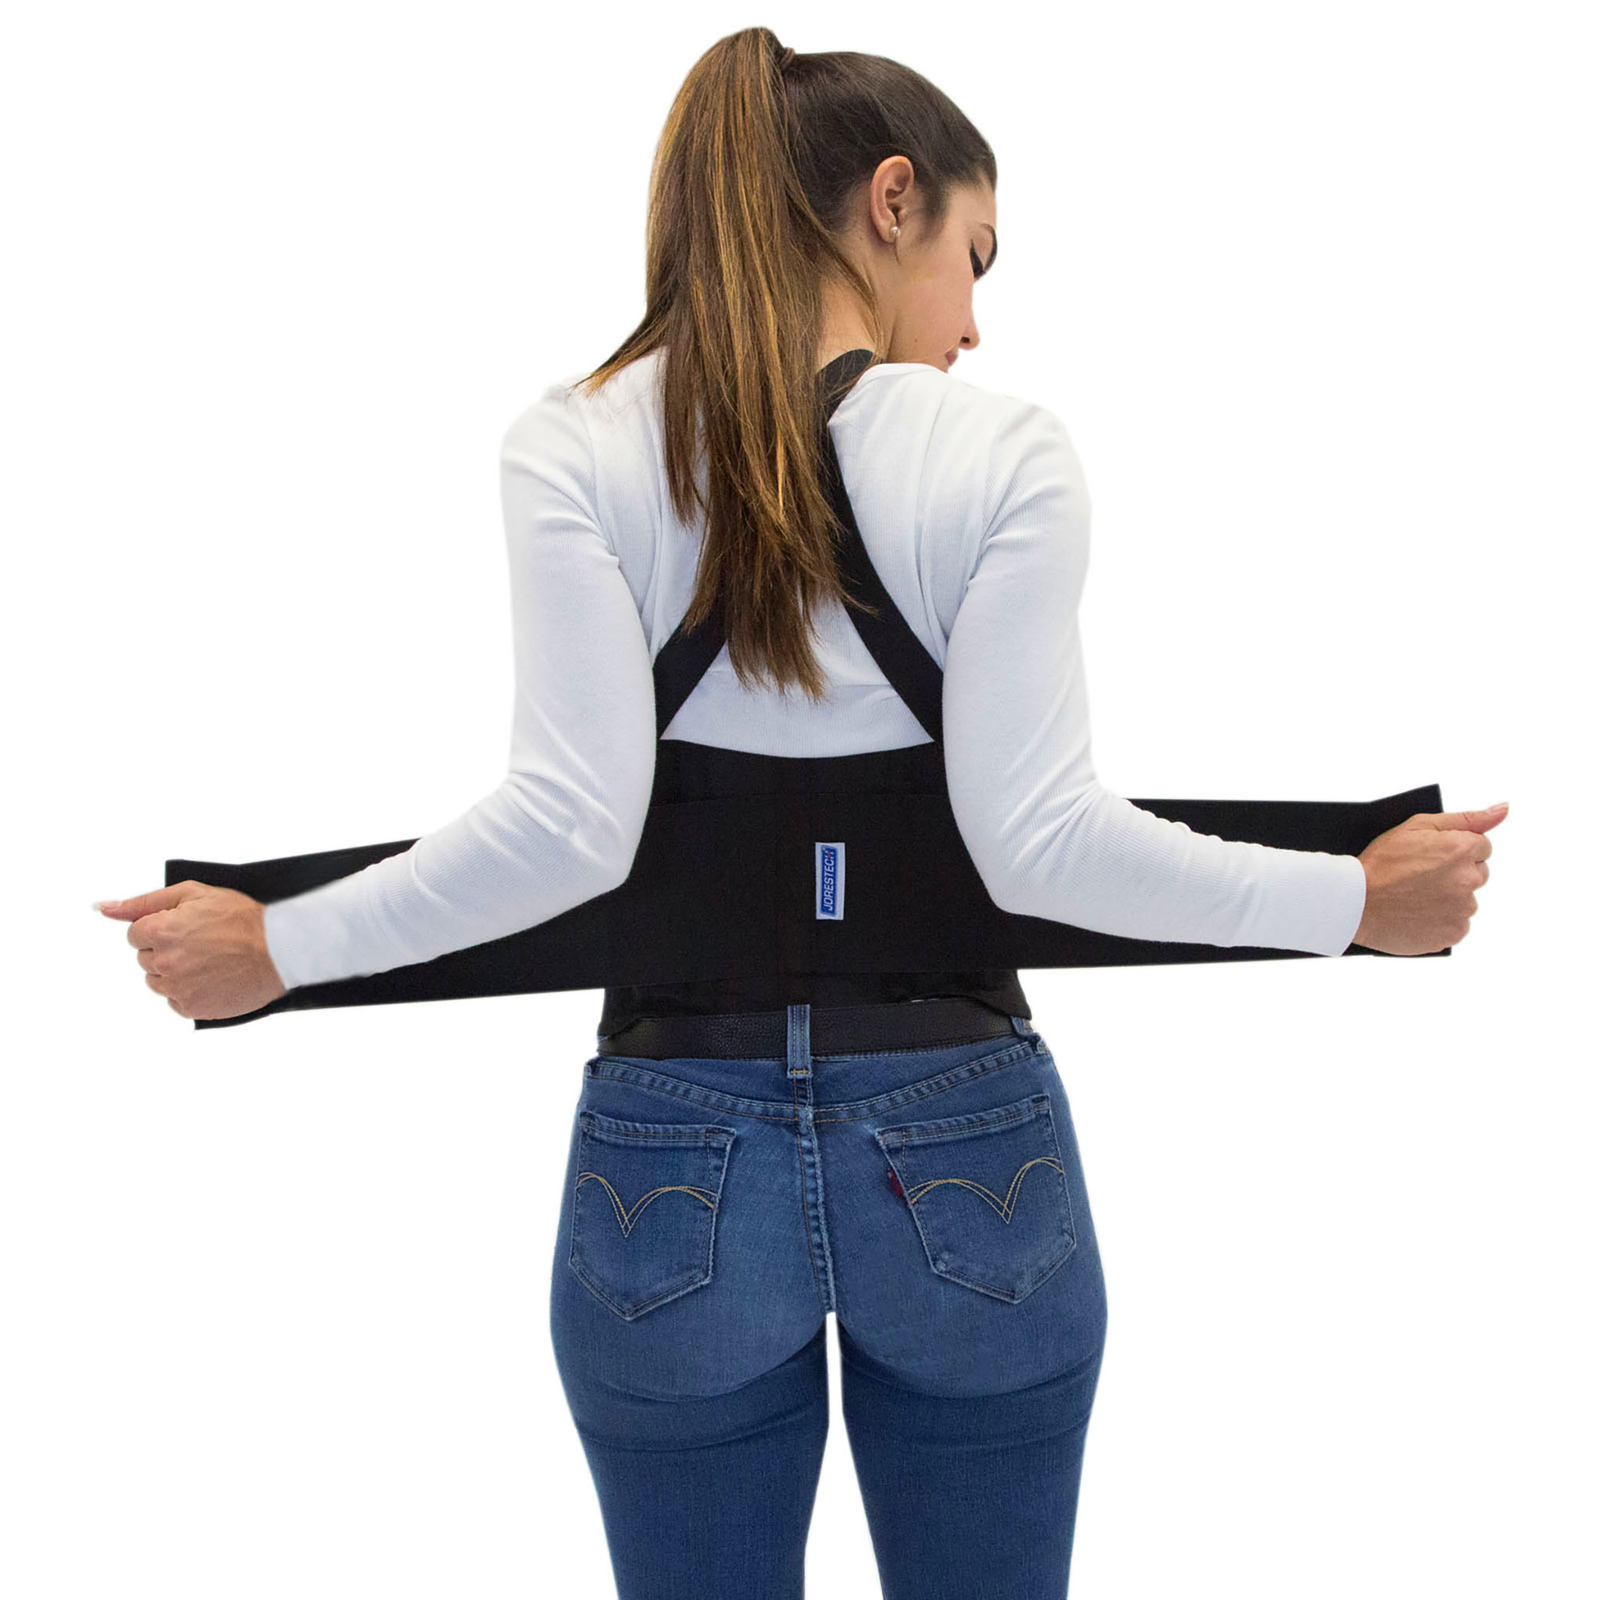 Back view of a lady pulling the elastic straps while donning the JORESTECH back support belt to adjust it to her wait size